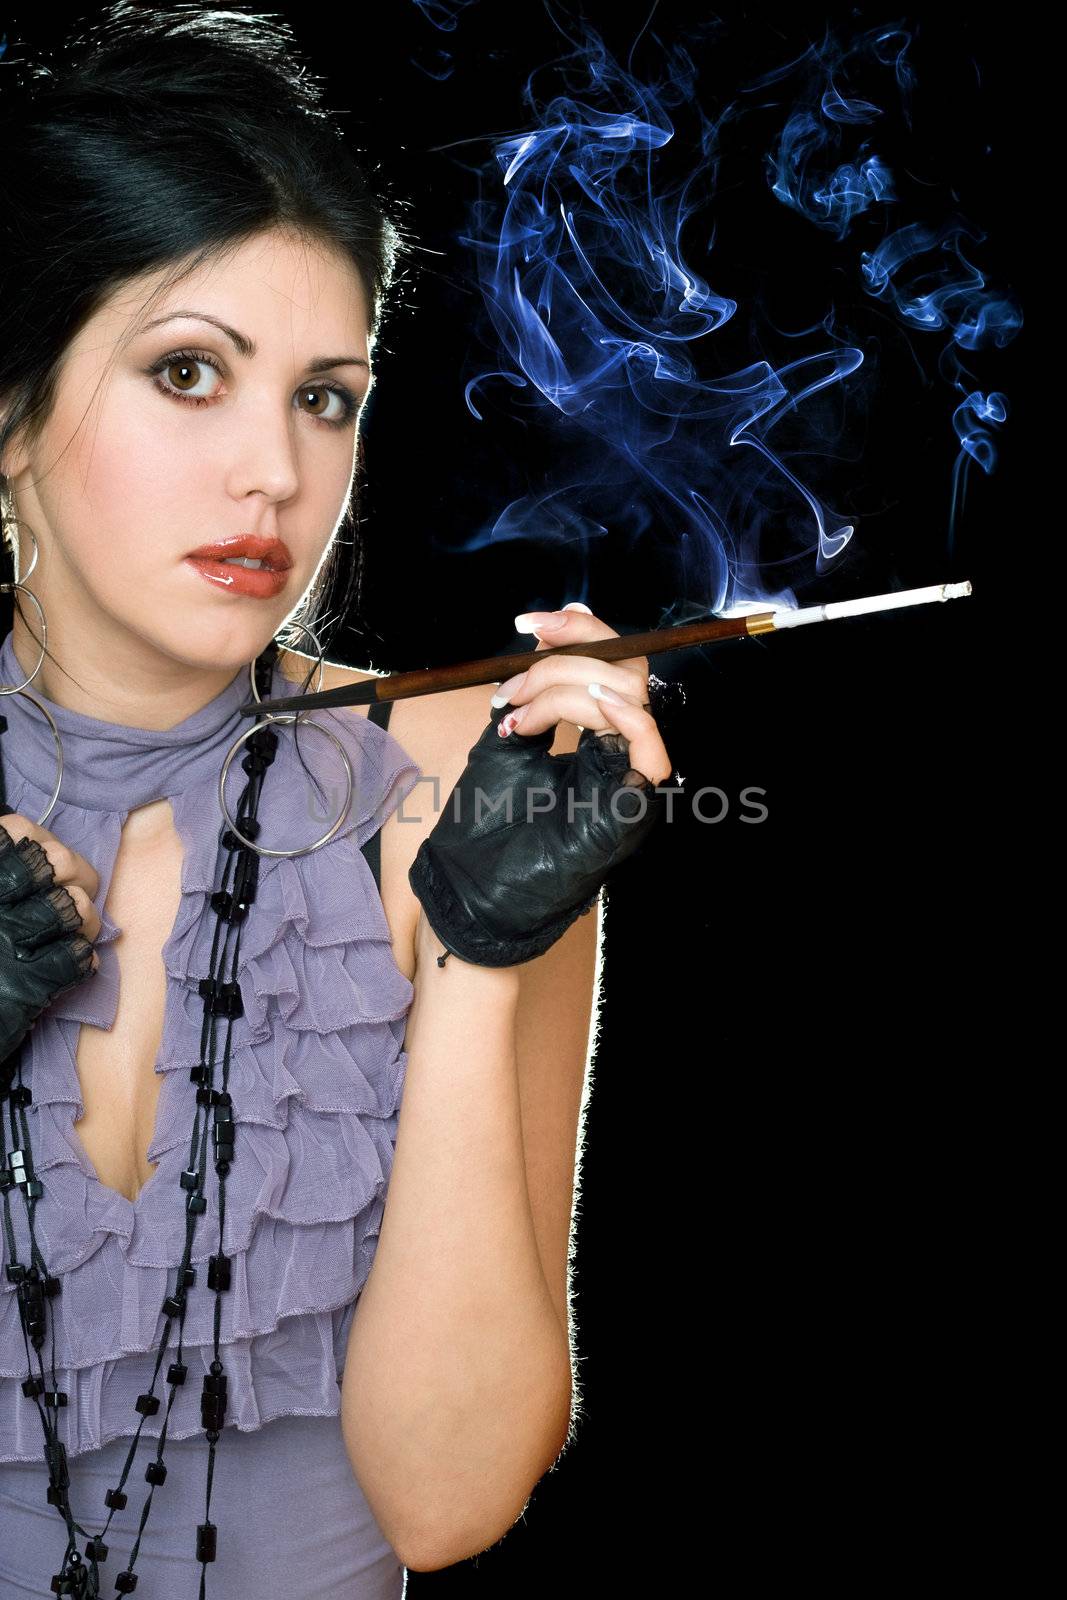 Portrait of a beautiful brunette with cigarette holder